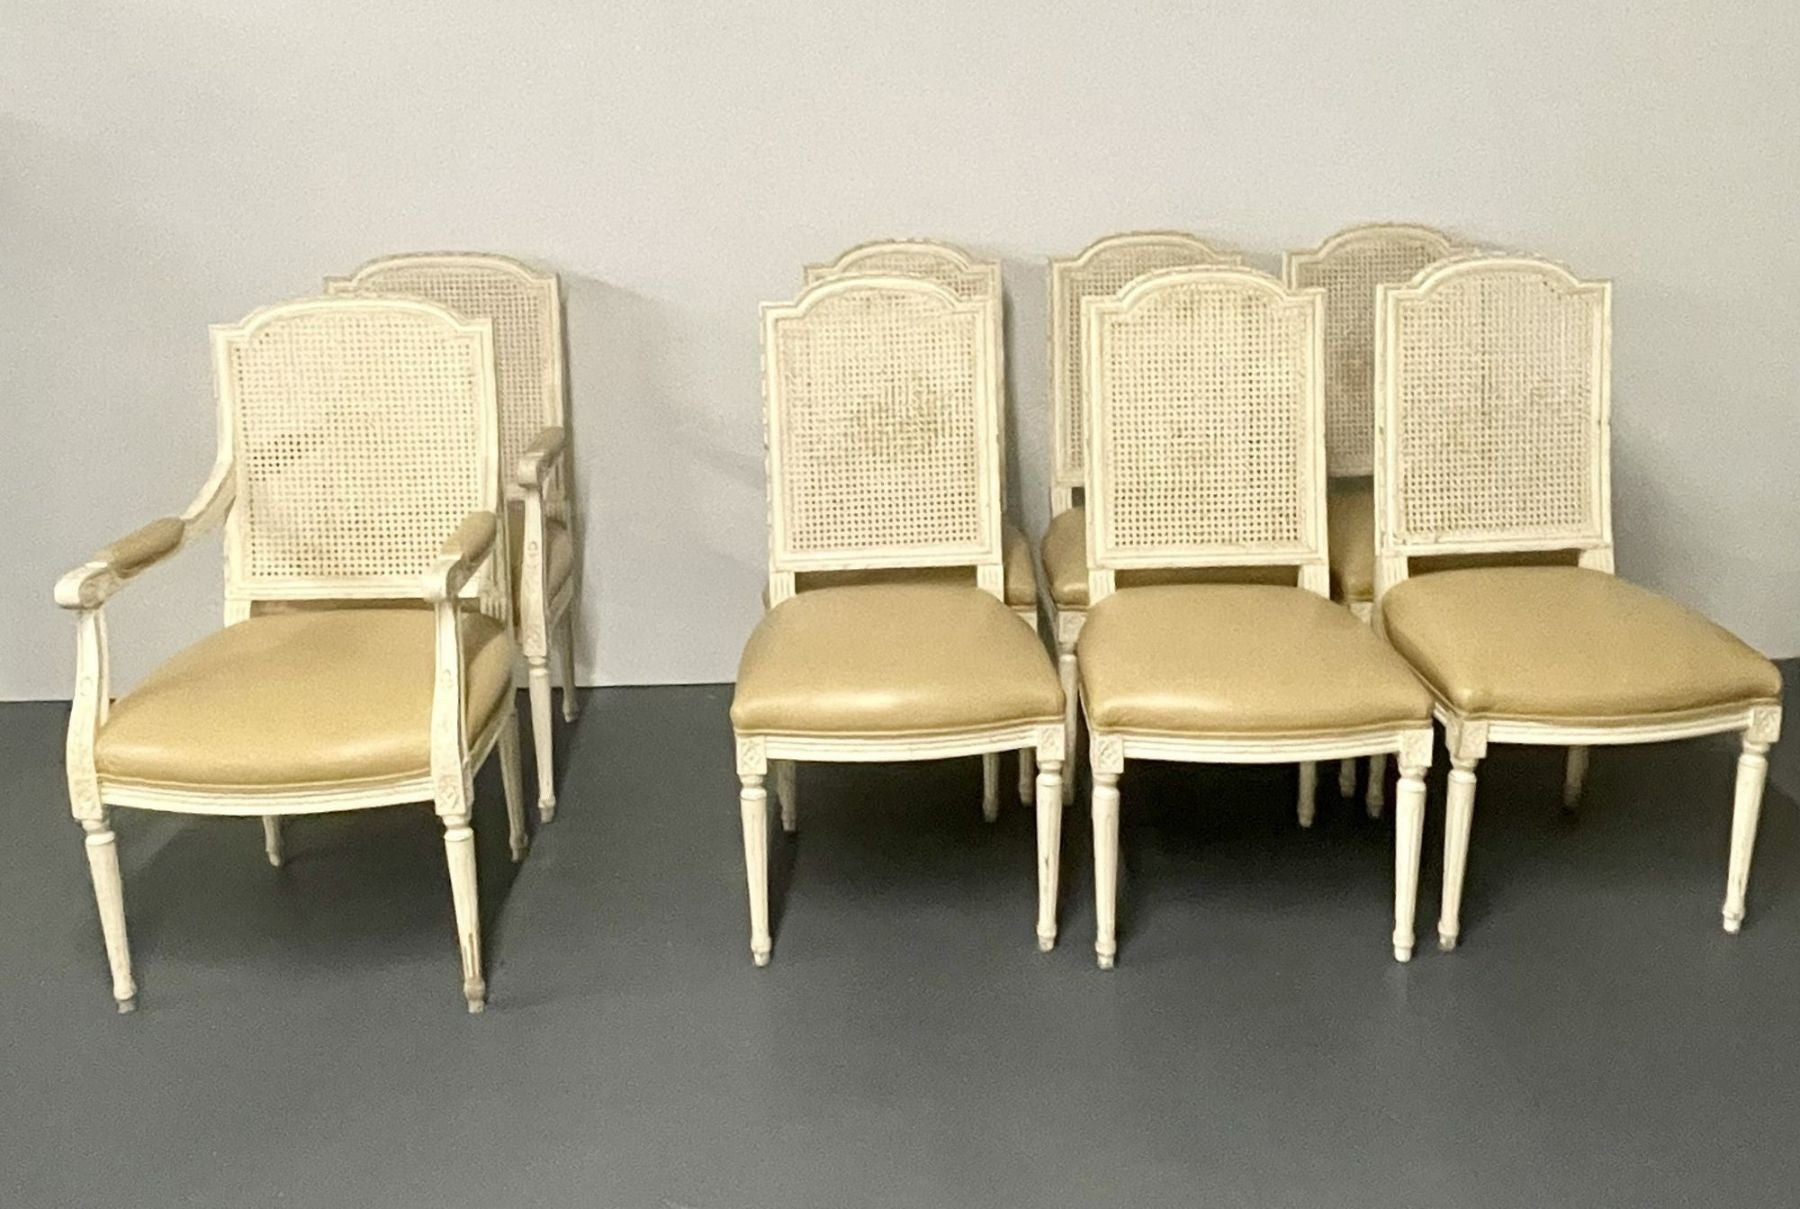 Louis XVI Style Traditional, Gustavian Dining Room Set. A custom Painted Dining Table & 8 Chairs, a pair of arm and six sides. This listing is only for the dining chairs. This finely crafted set is painted in a cream white finish having a French